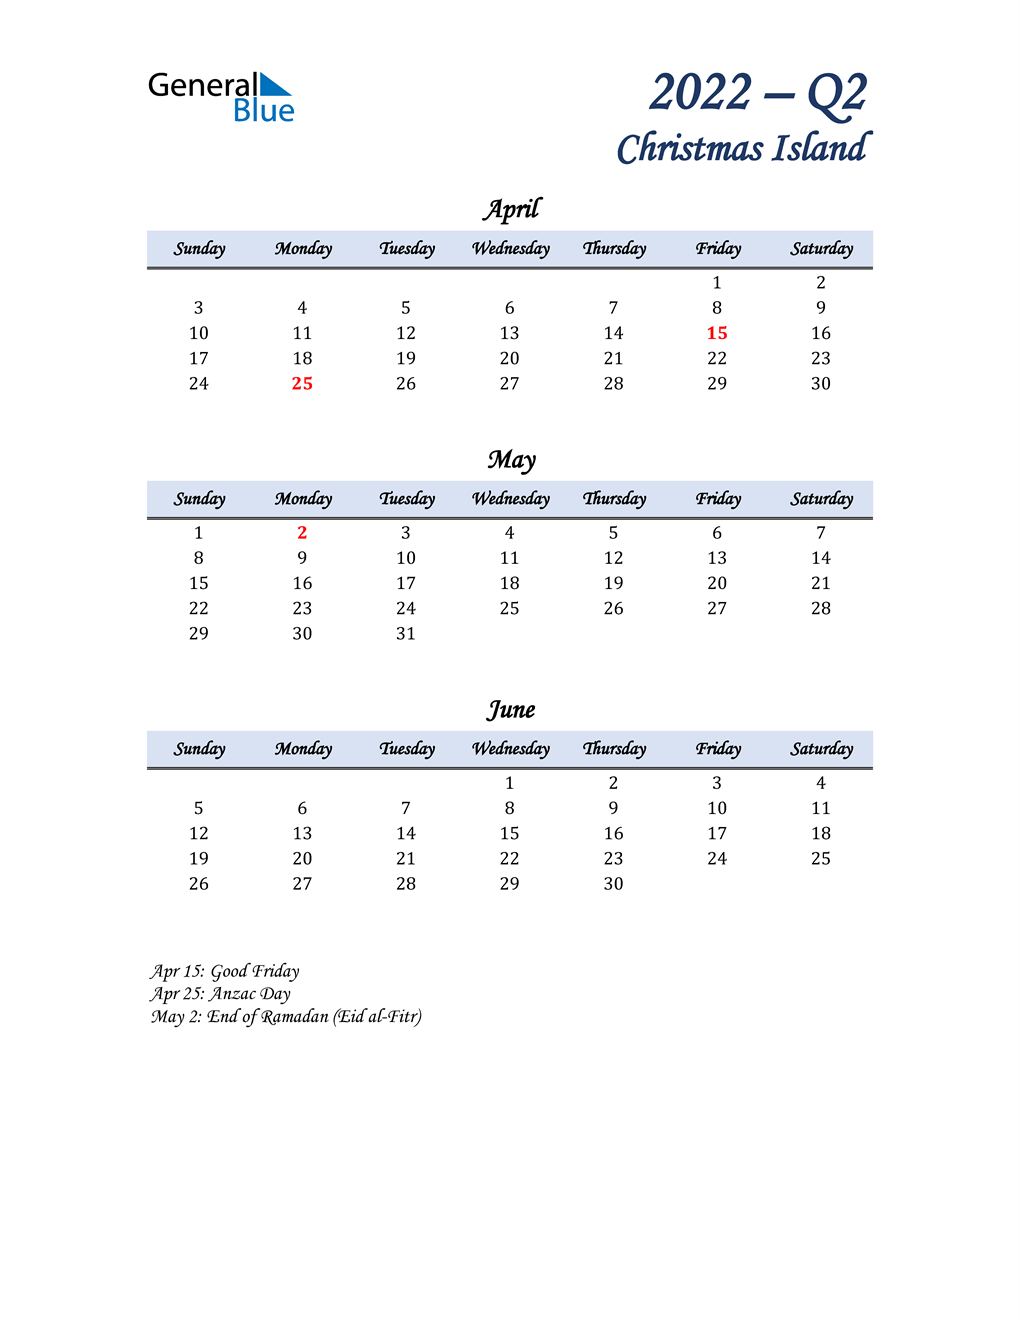  April, May, and June Calendar for Christmas Island